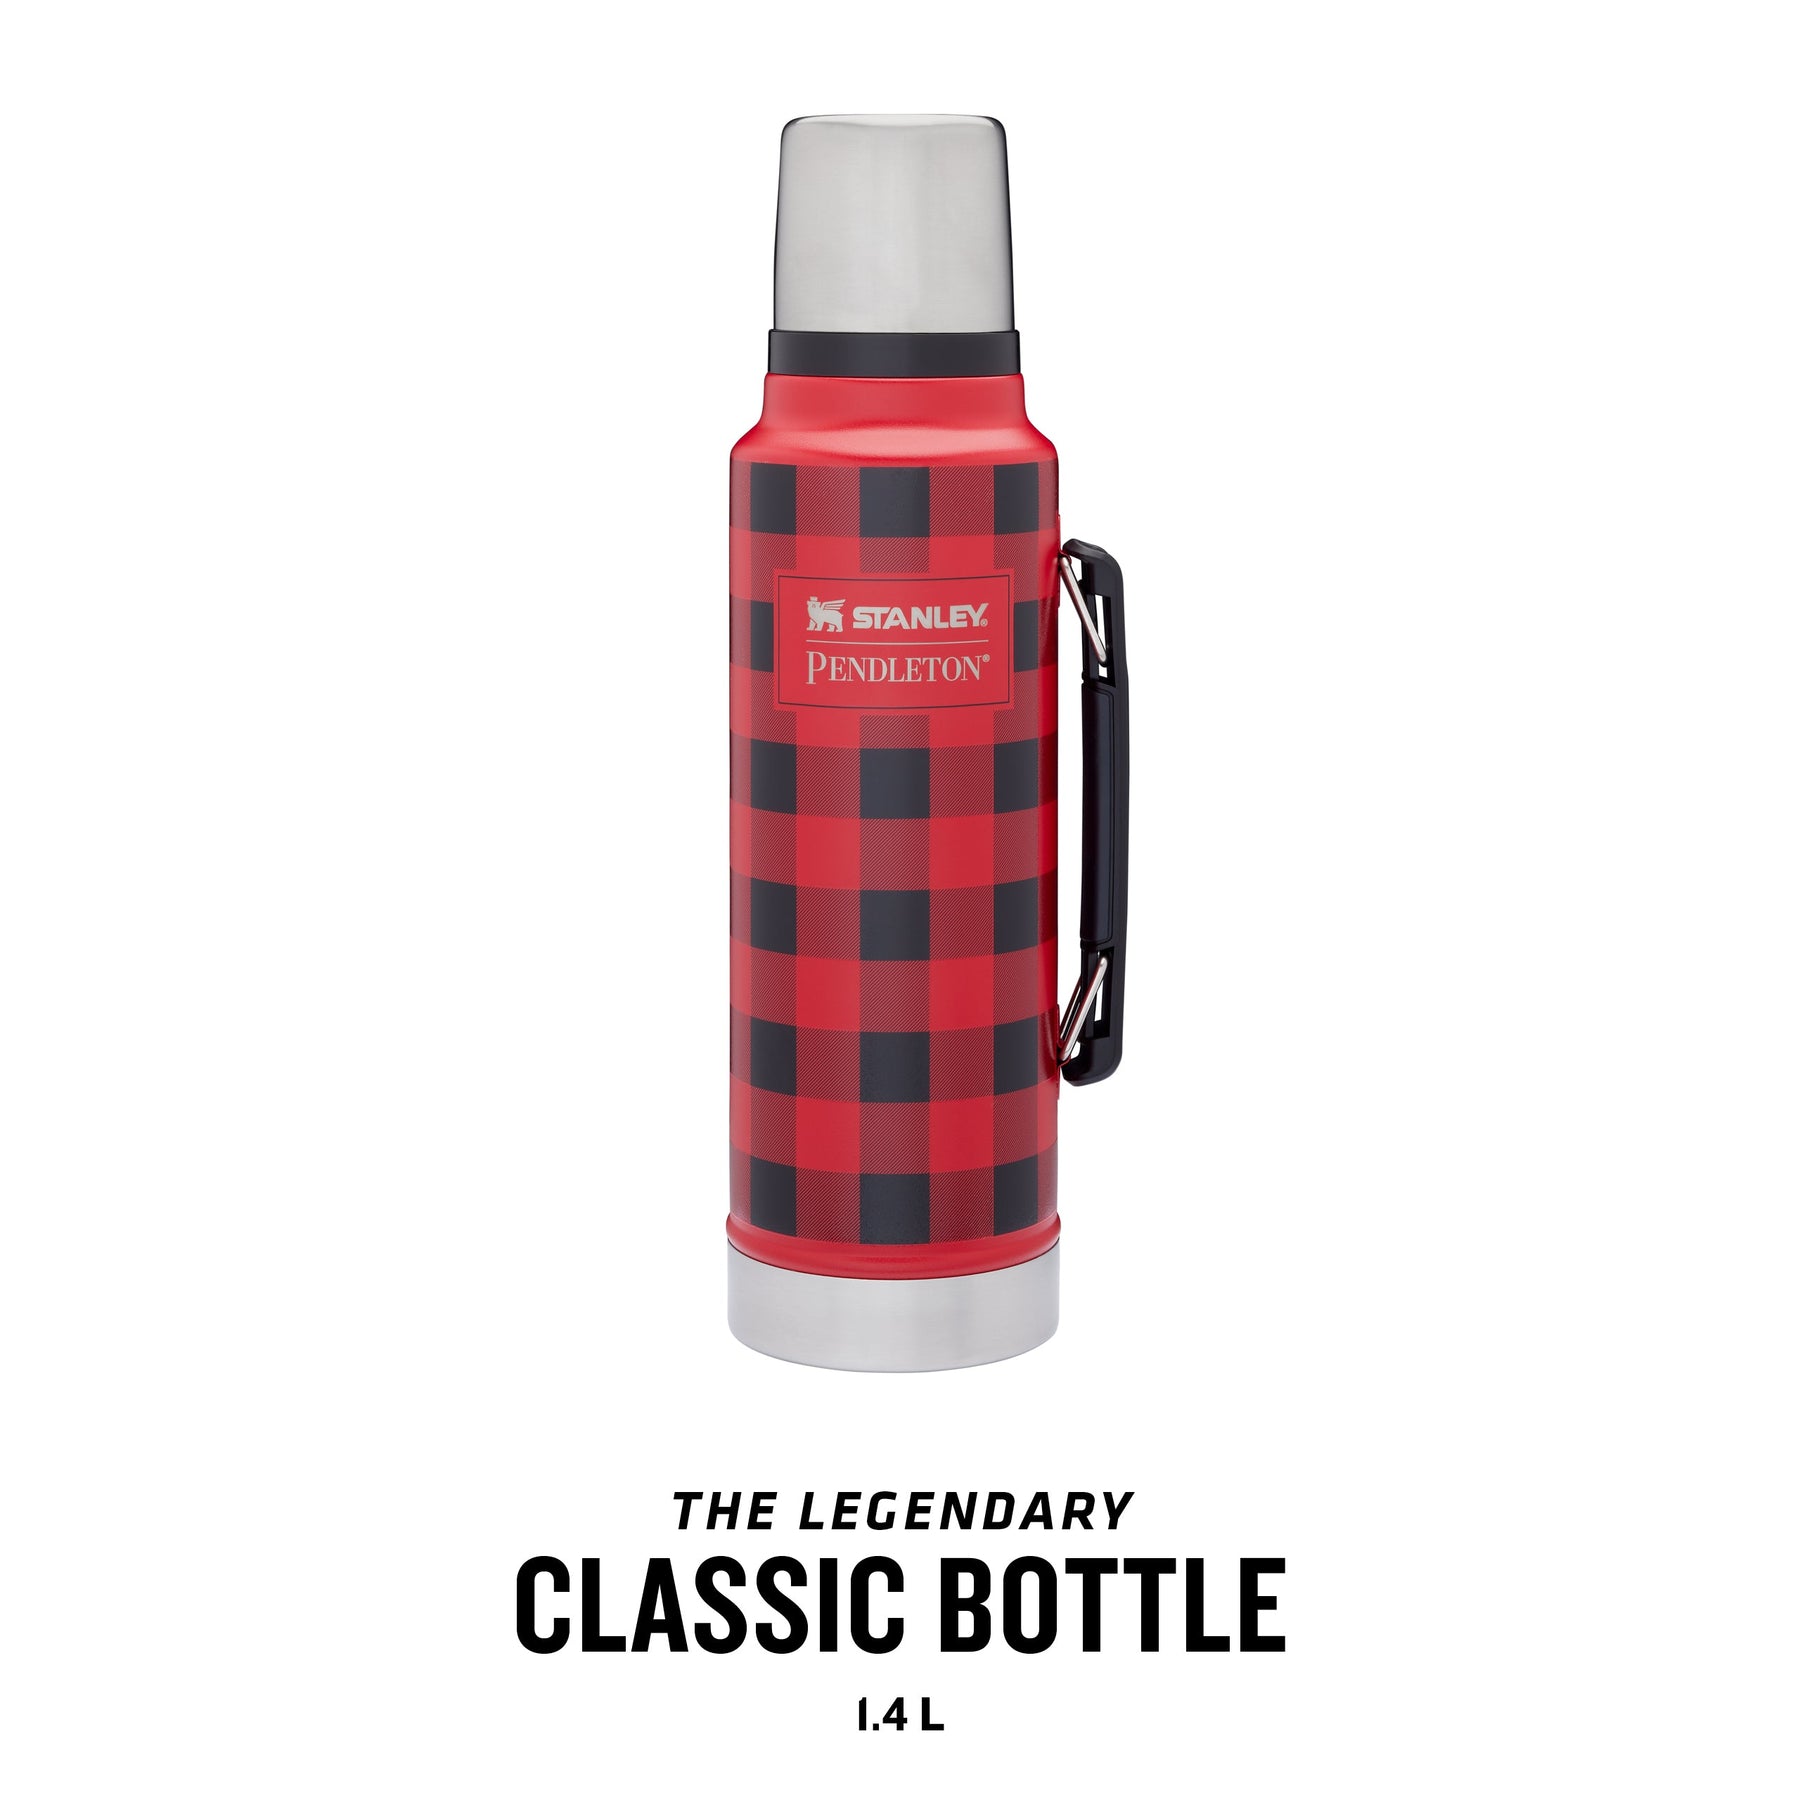 https://cdn.shopify.com/s/files/1/0516/4564/5000/products/StanleyXPendleton-TheLegendaryClassicBottle1.4L-1.5QT-BuffaloCheckRed-ProductName_1800x1800.jpg?v=1699055794